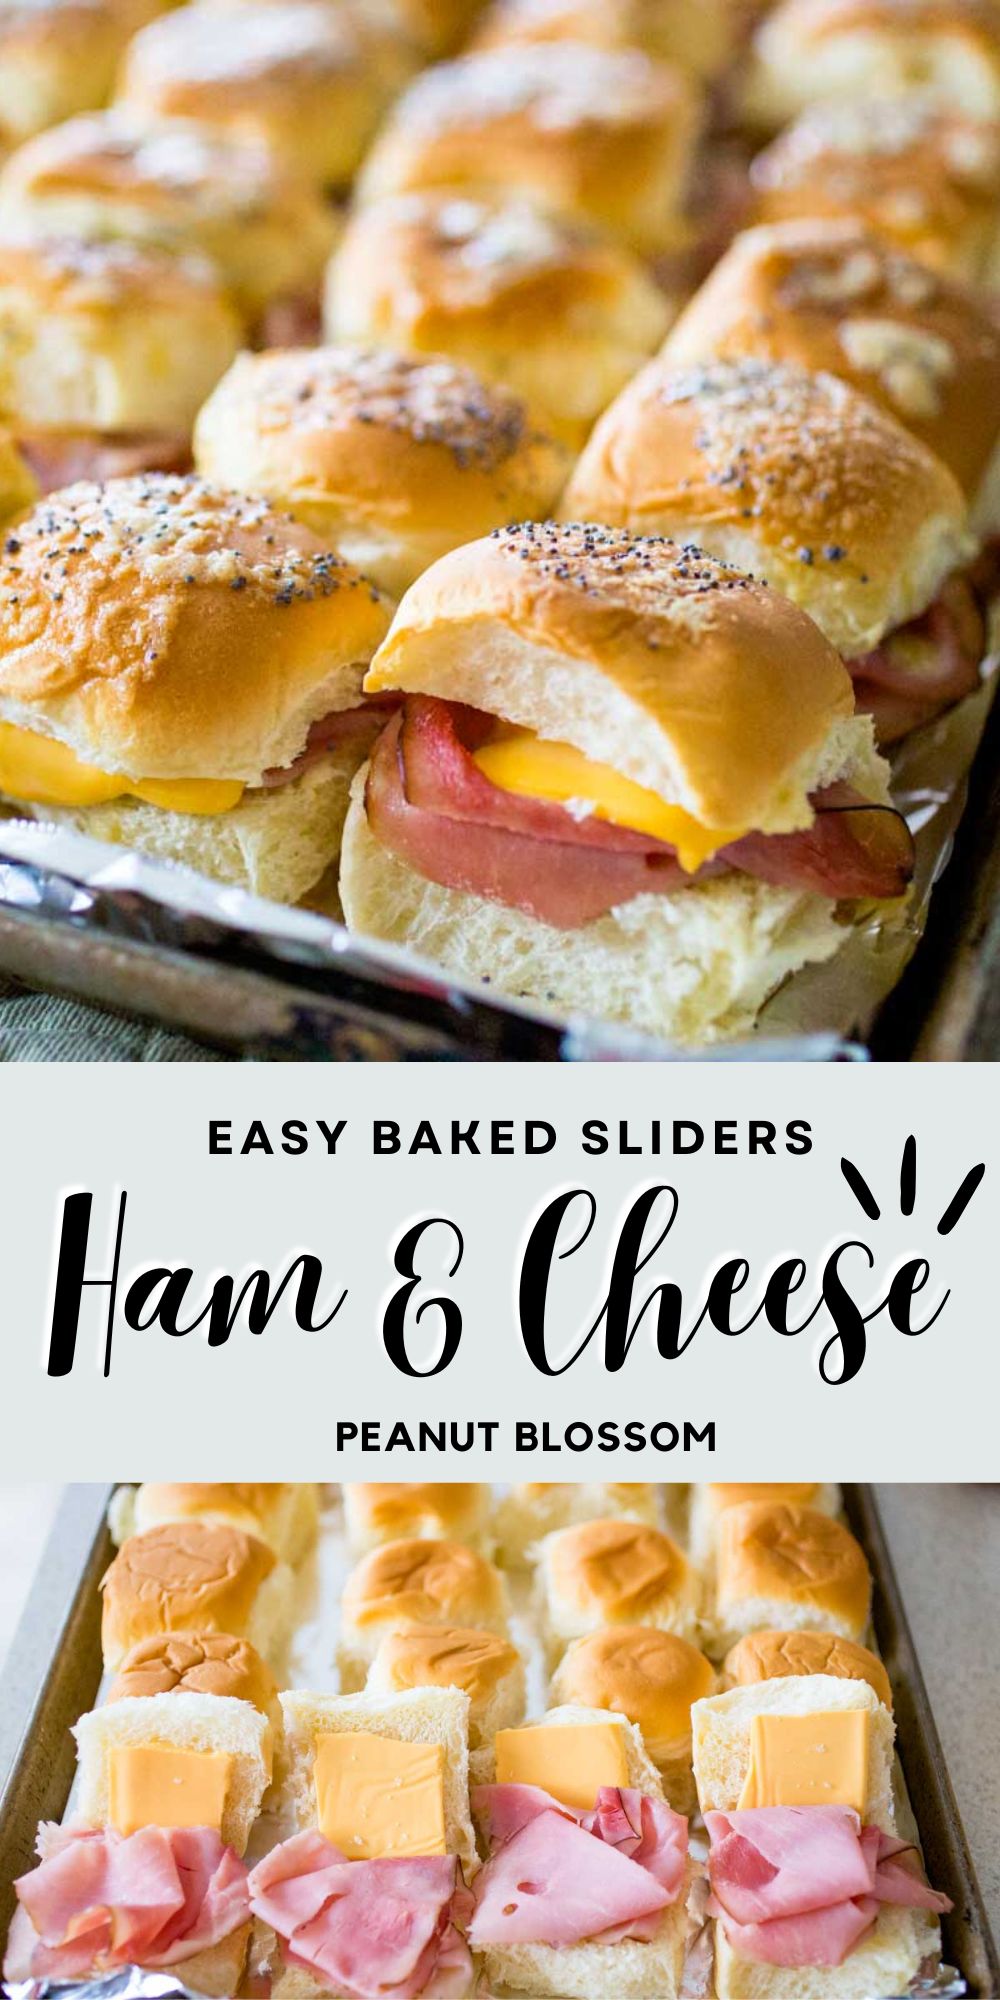 The photo collage shows the ham and cheese sliders fresh from the oven next to a photo of them being filled on a baking pan.